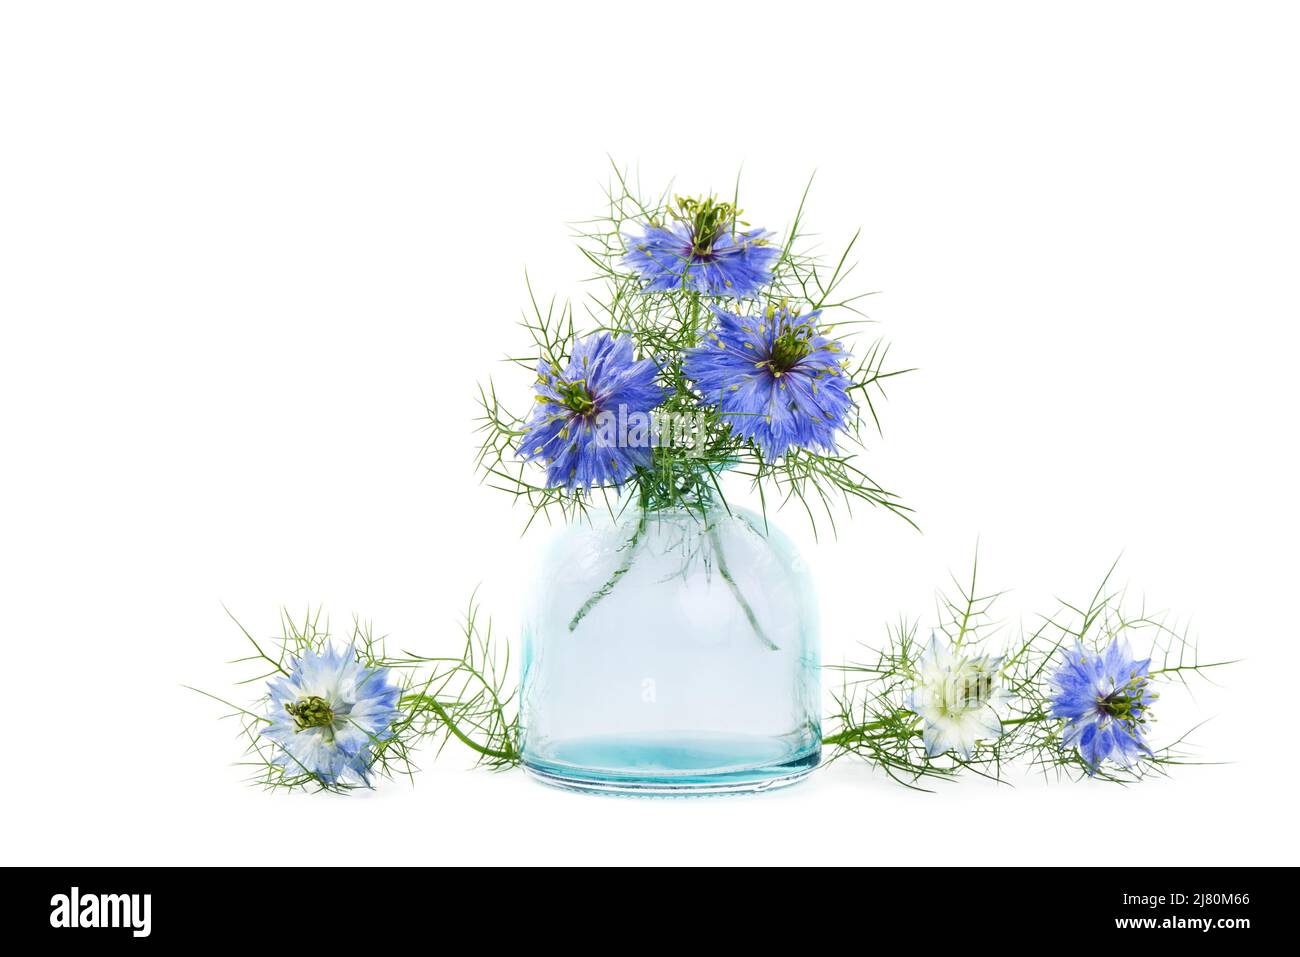 Black cumin flowers in a blue vase, isolated on white background Stock Photo